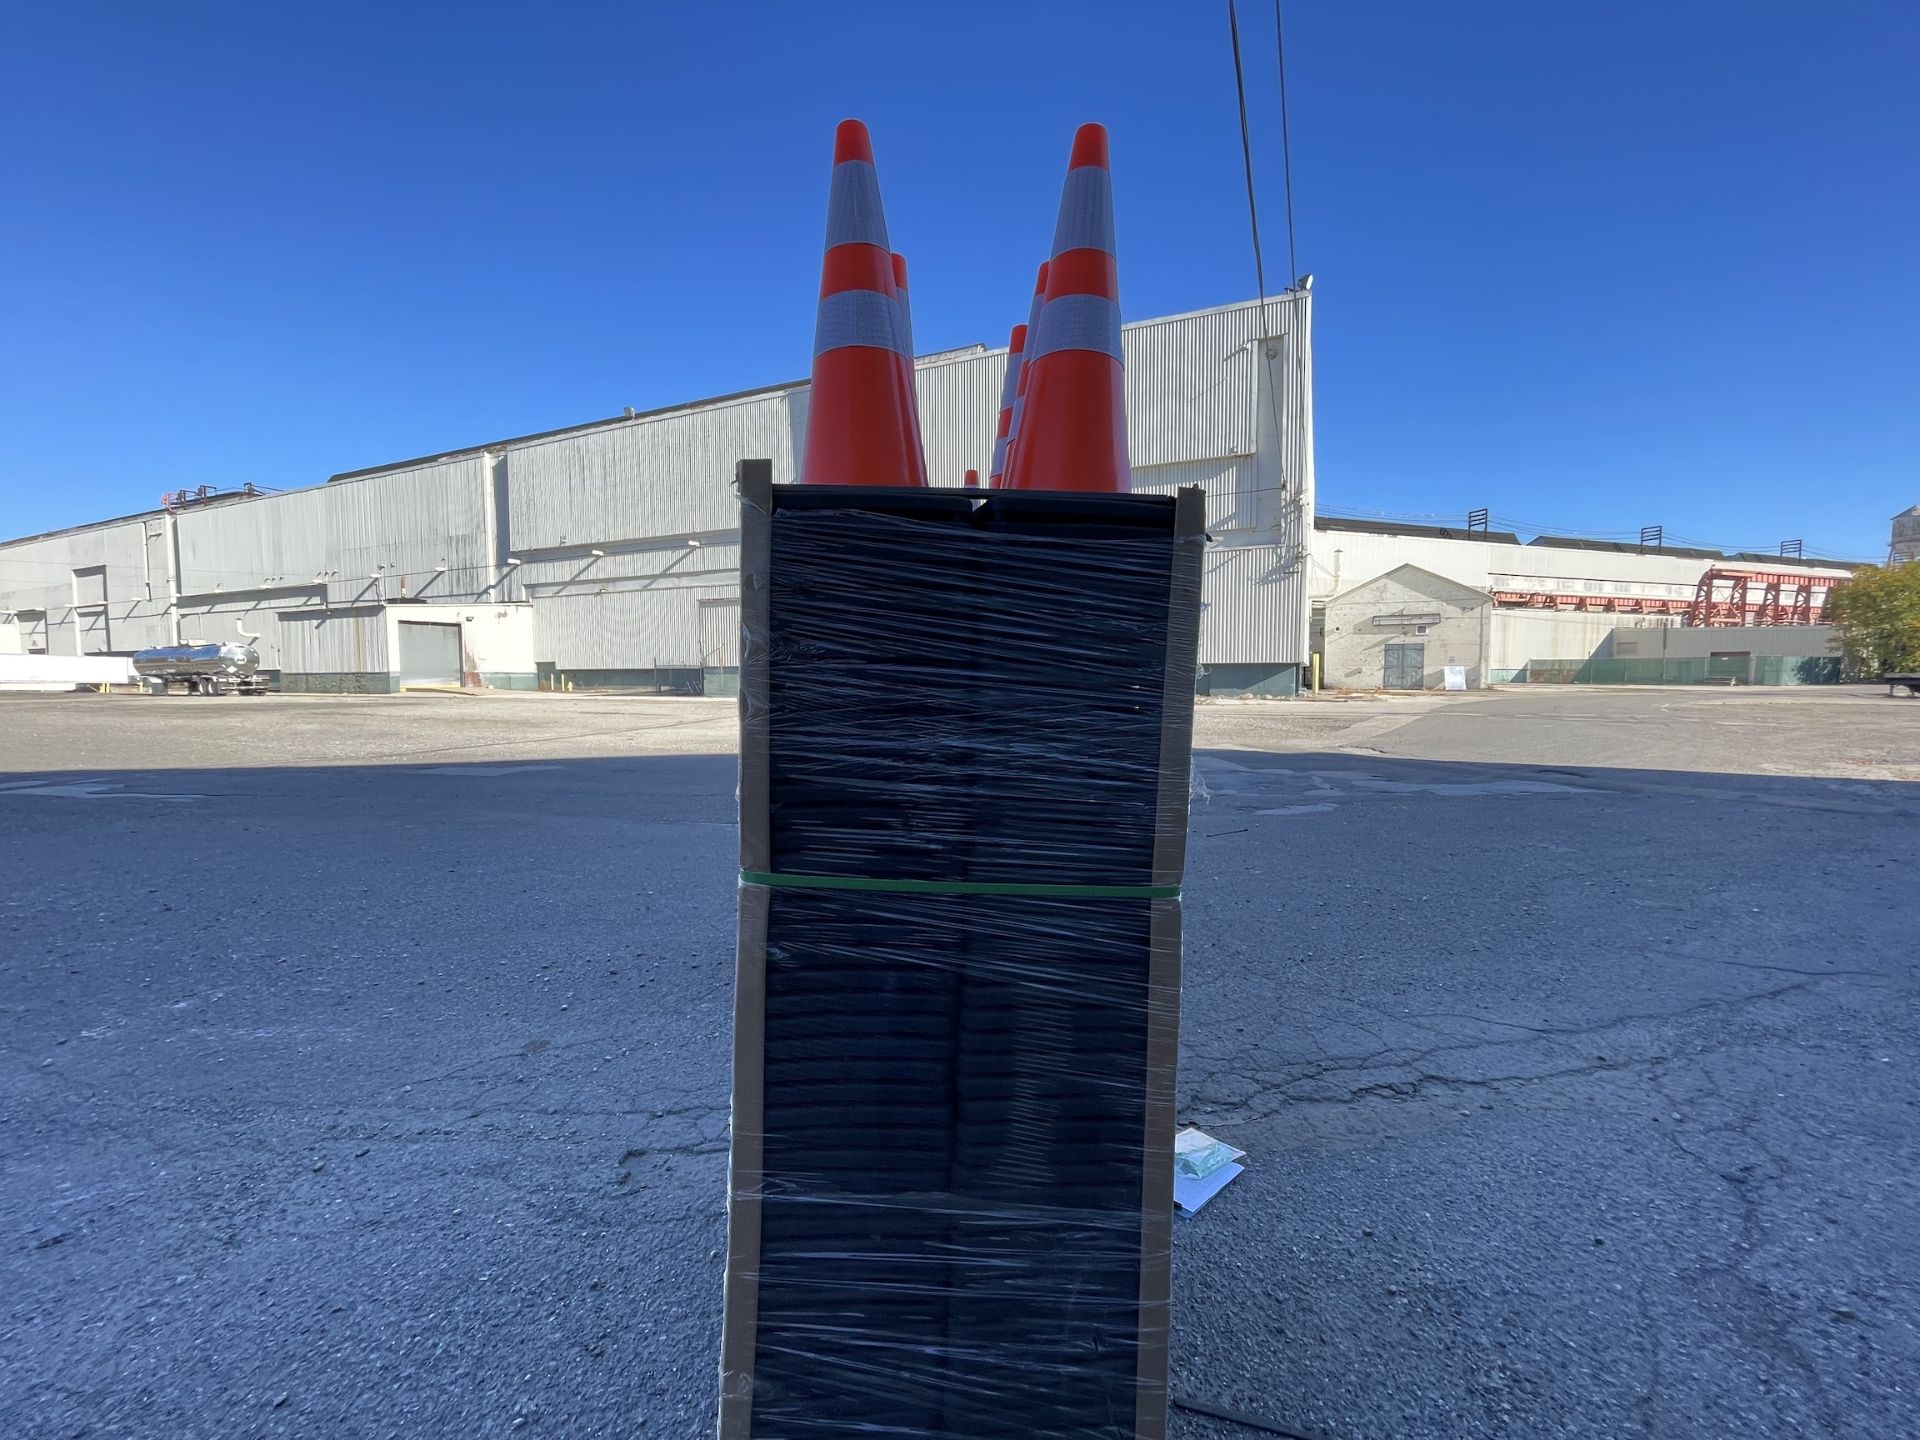 Lot of 250 Brand New Safety Highway Cones (NY113) - Image 4 of 7